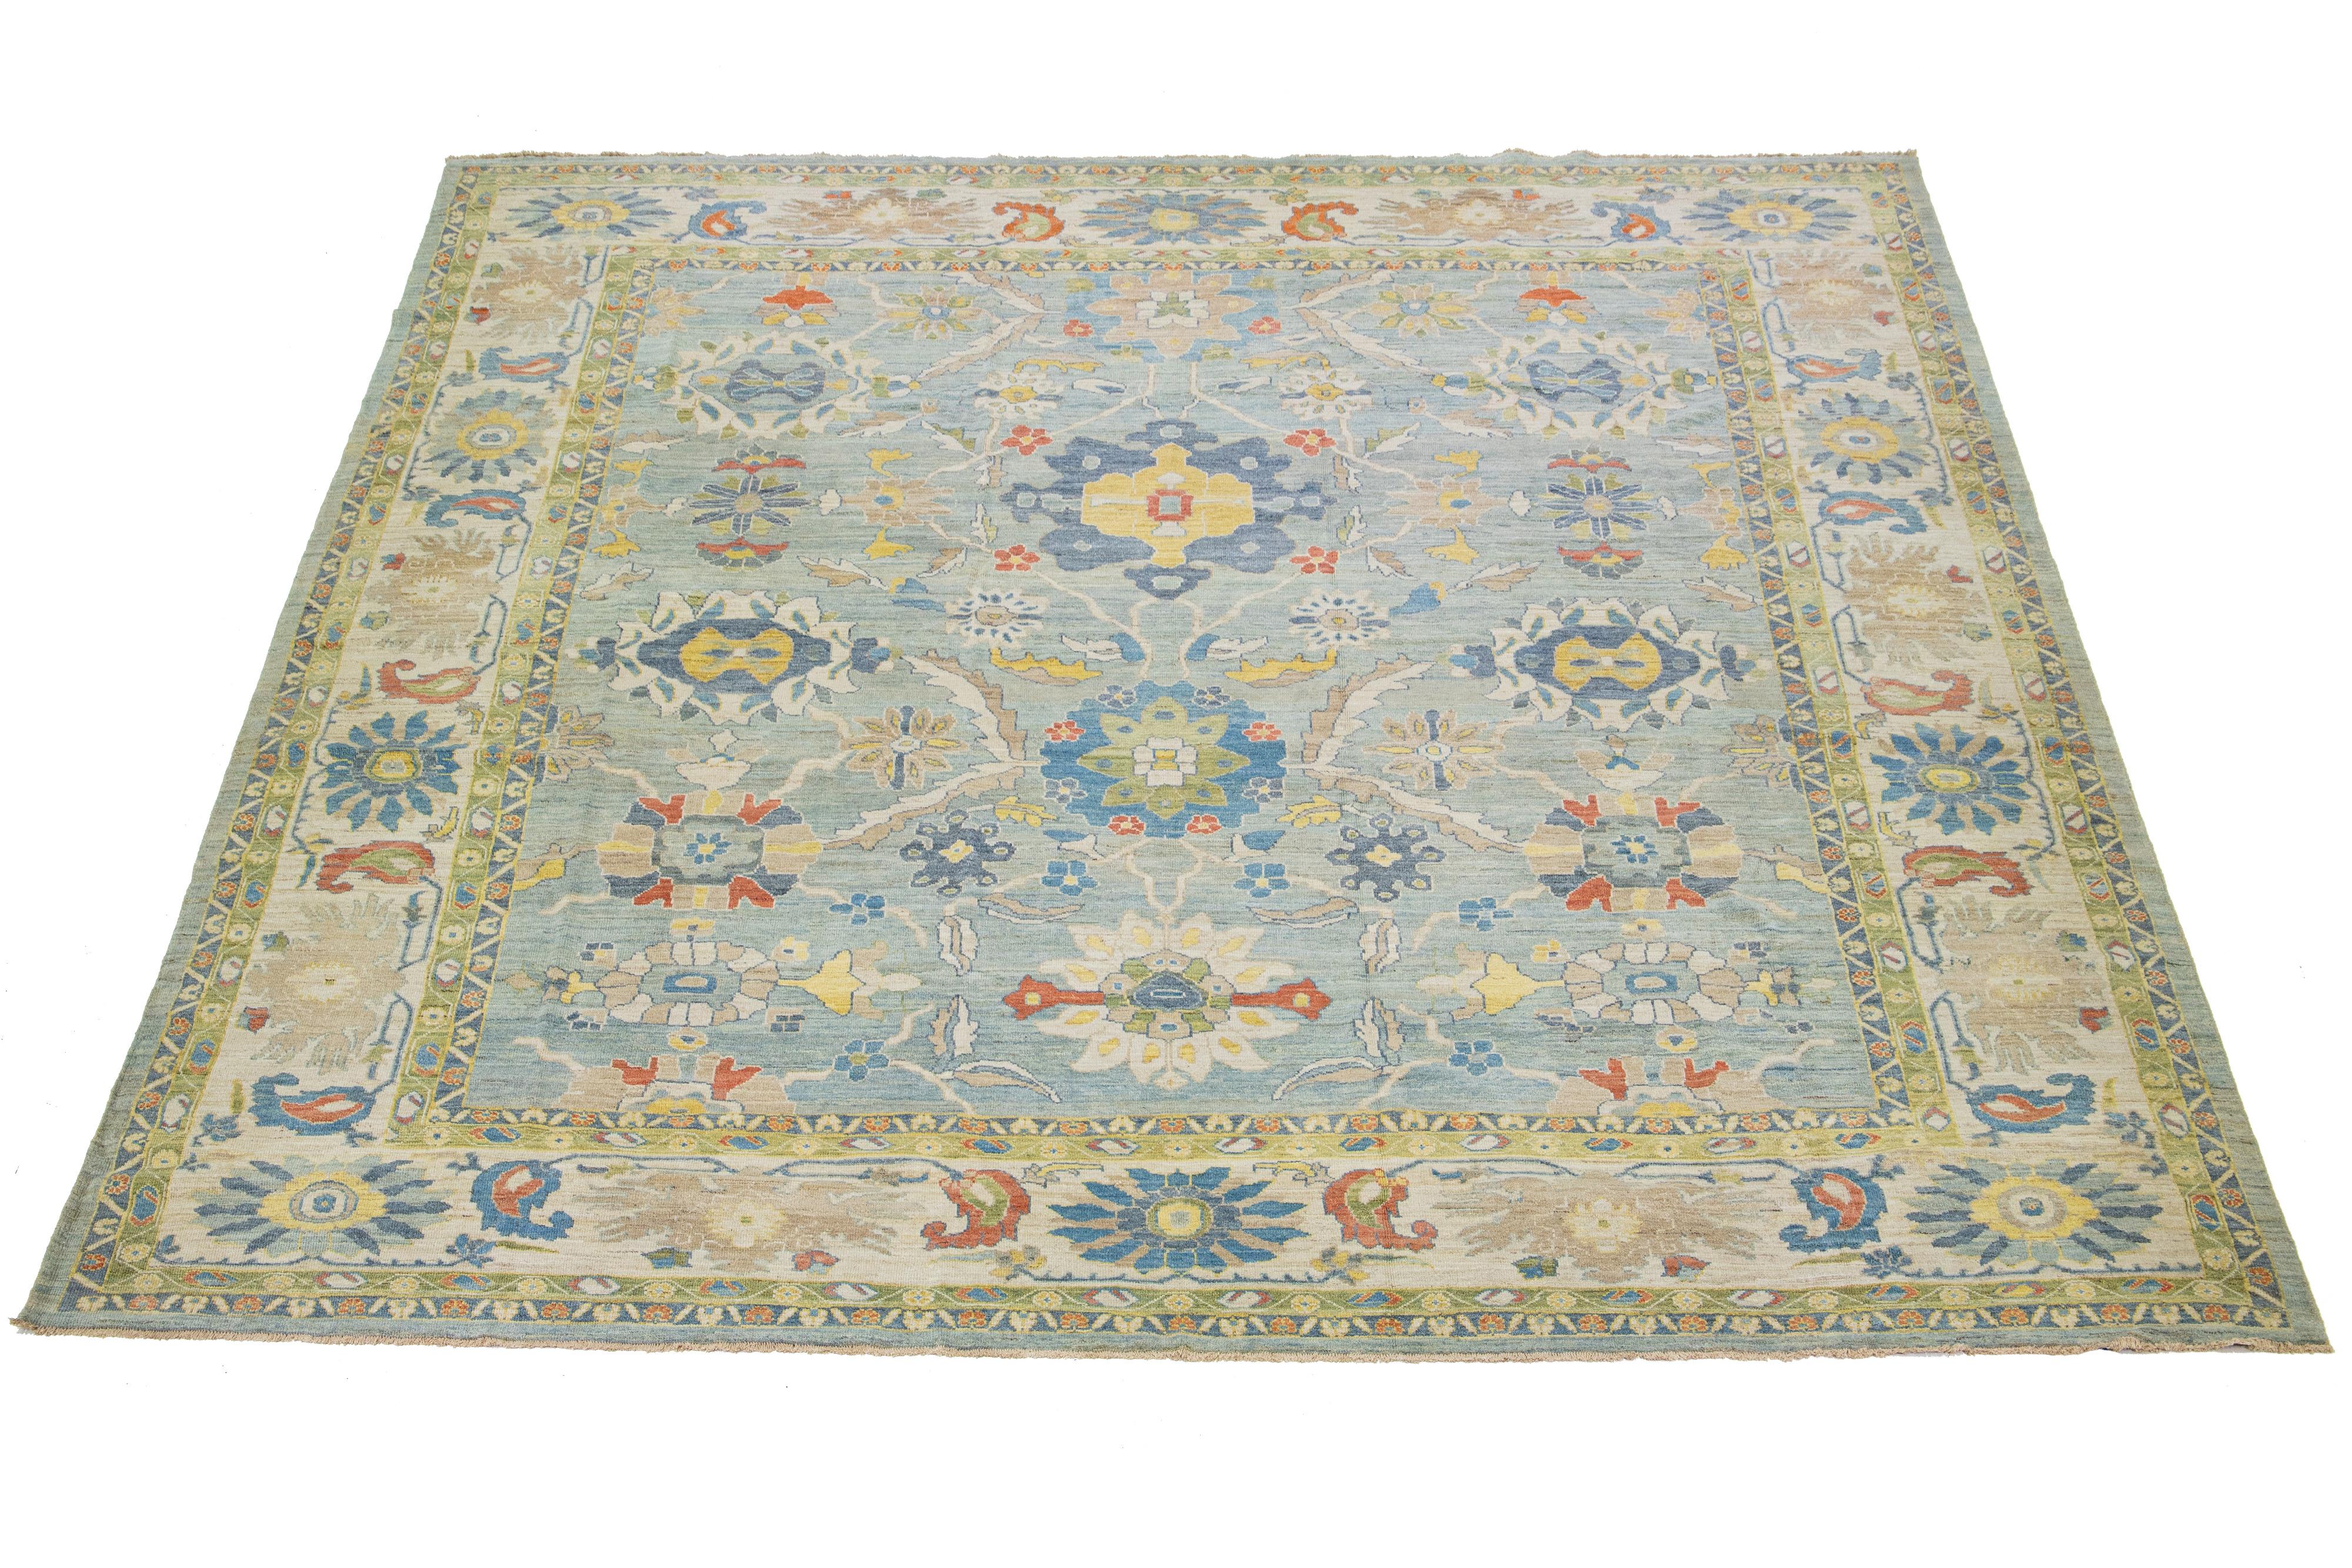 This stunning, hand-knotted Sultanabad rug features a modern design with a light blue base. The Persian rug is bordered with a beige frame and embellished with many colors that form an attractive floral pattern.

This rug measures 14'10